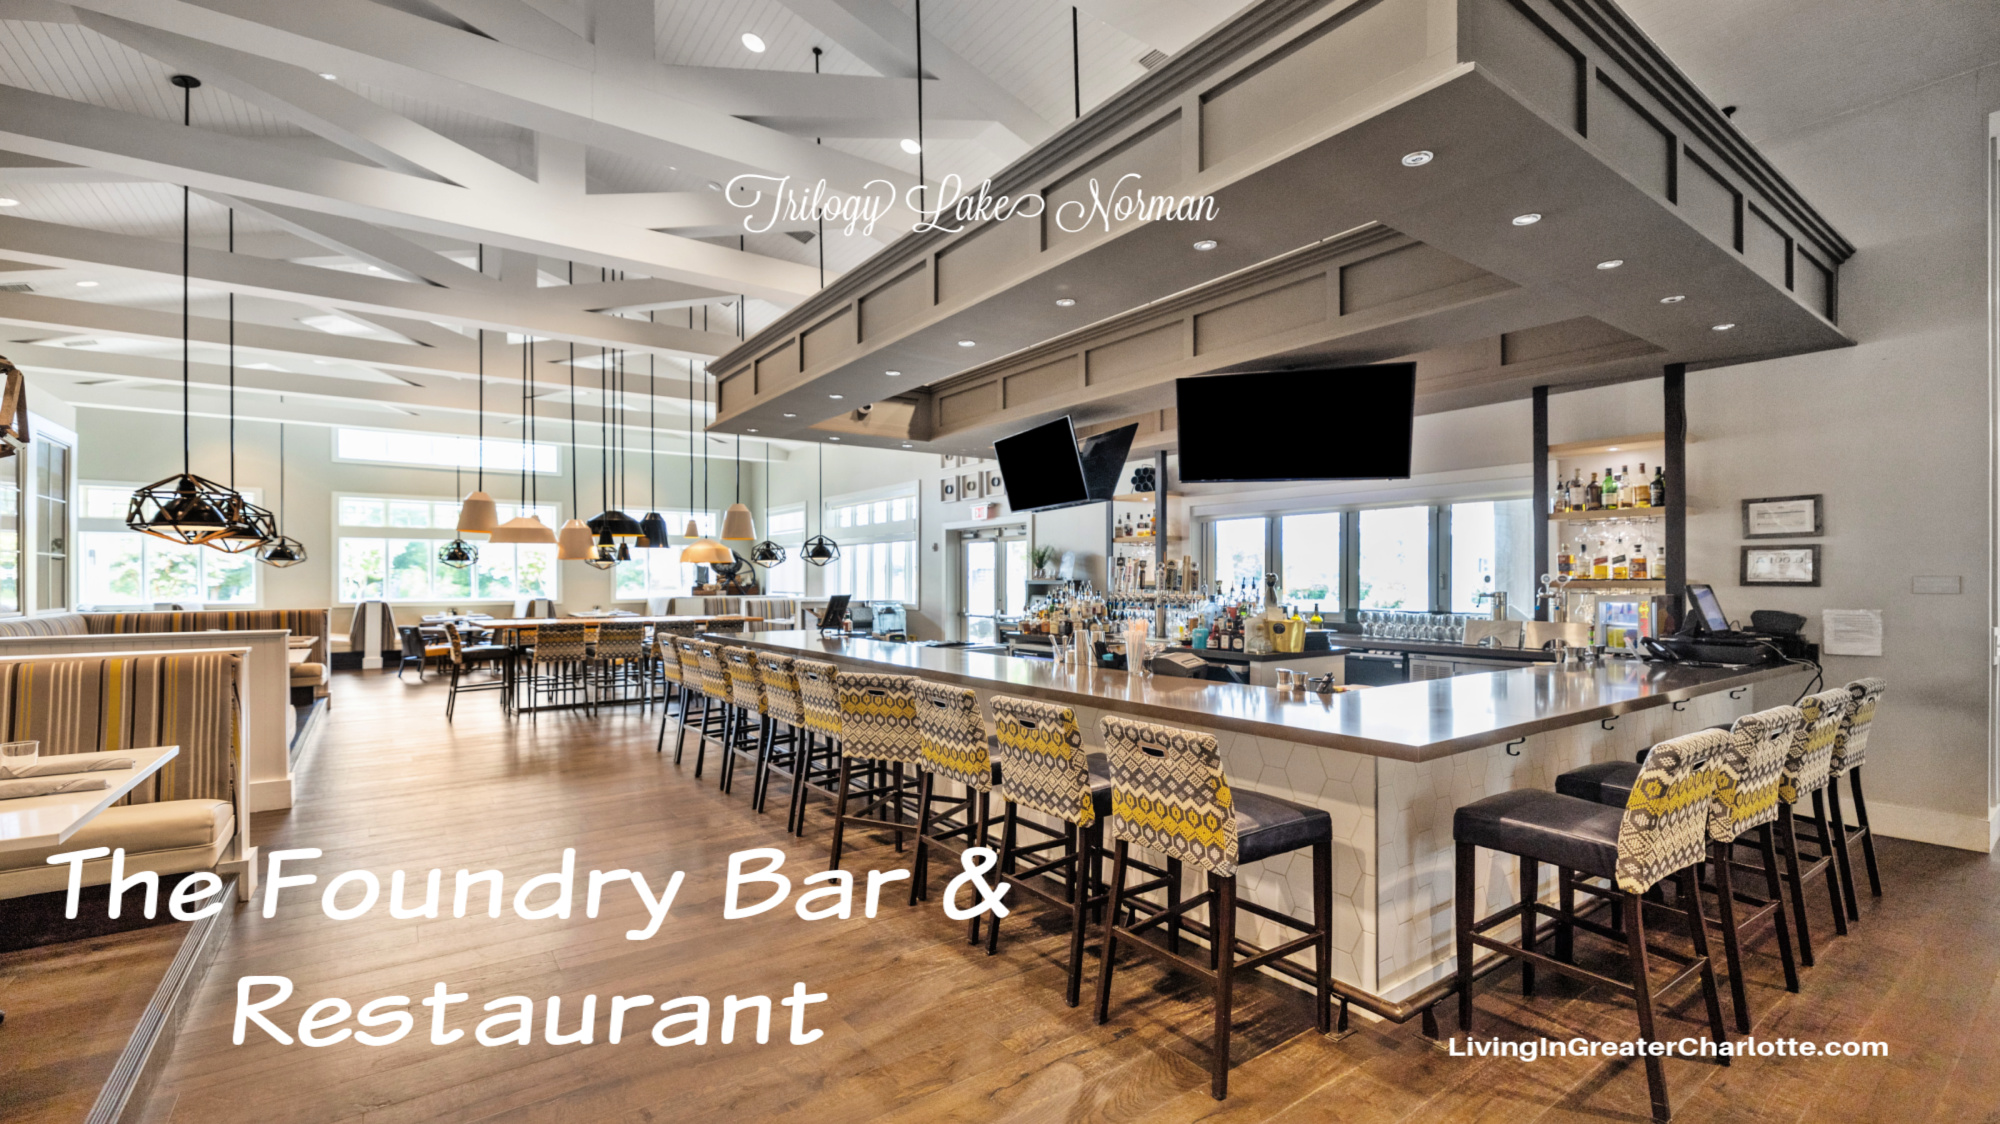 Trilogy Lake Norman The Foundry Bar and Restaurant - 55+ Community